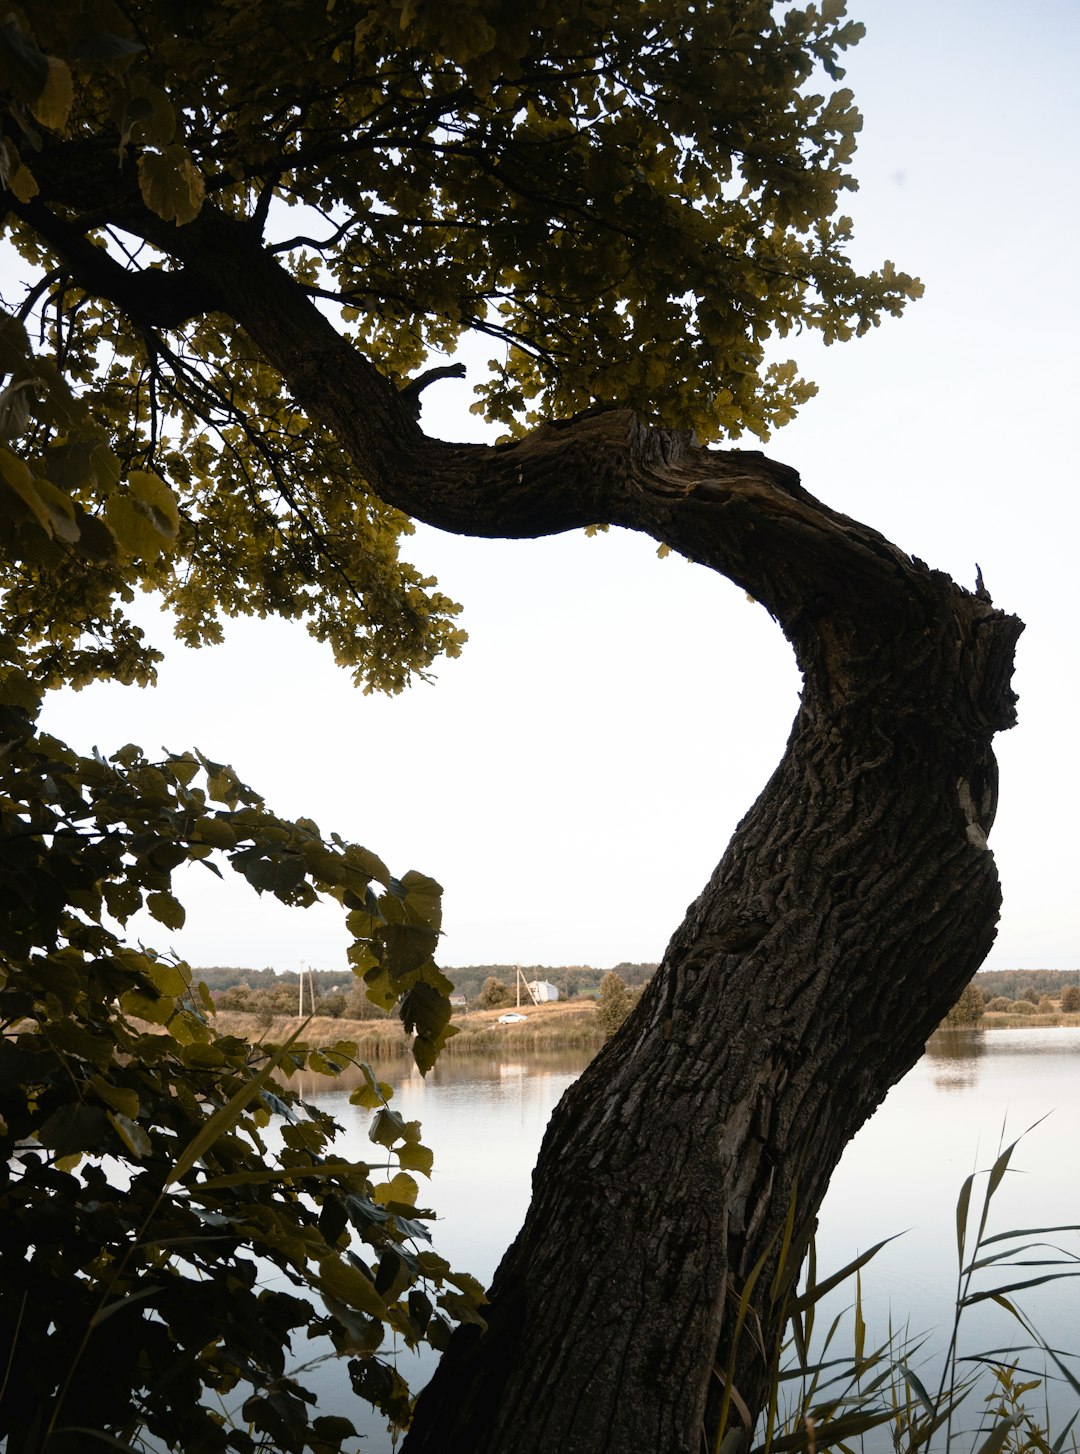 brown tree trunk near body of water during daytime